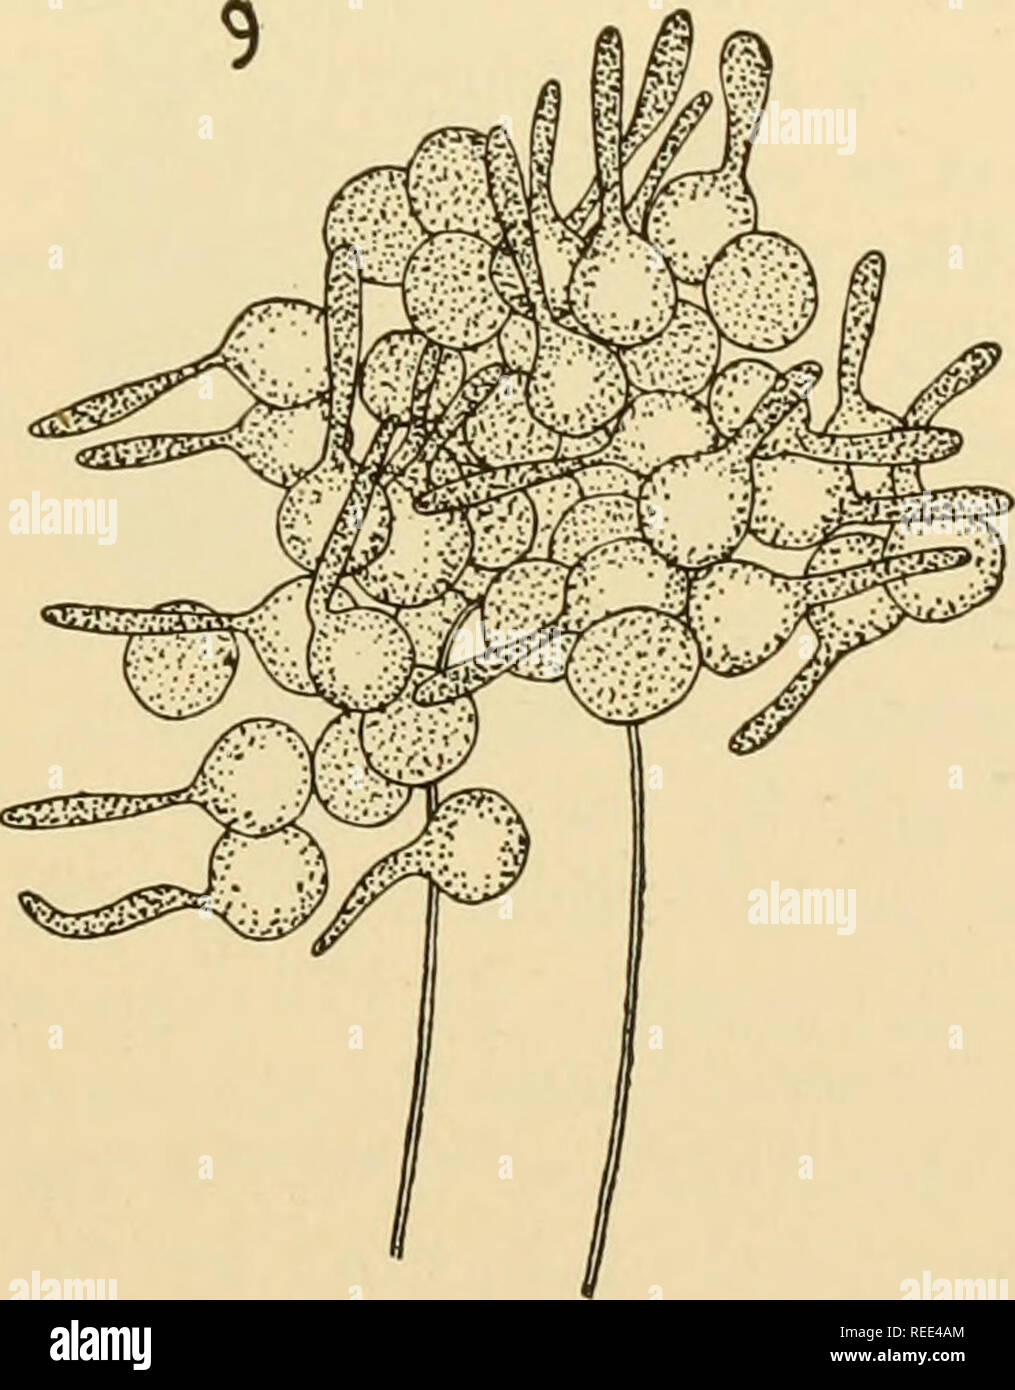 . Comparative morphology of Fungi. Fungi. -piQ, 39.—Saprolegnieae. Degeneration of diplanetic zoospores. 1. Achlya racemosa. Sporangiferous hyphae. Both upper sporangia are empty while the lower contains zoo- spores already surrounded by a membrane (Reticulate sporangium). 2. Dictyuchus mono- sporus. Two superimposed zoosporangia, with reticulate structure, the upper empty, the lower just mature. 3. Exit of zoospore from zoosporangium. 4. Zoospore surrounded by membrane. 5. Resting zoospore has just slipped out of membrane. 6. Thraustotheca clavata. Liberation of sporangiospore balls. 7. Exit  Stock Photo